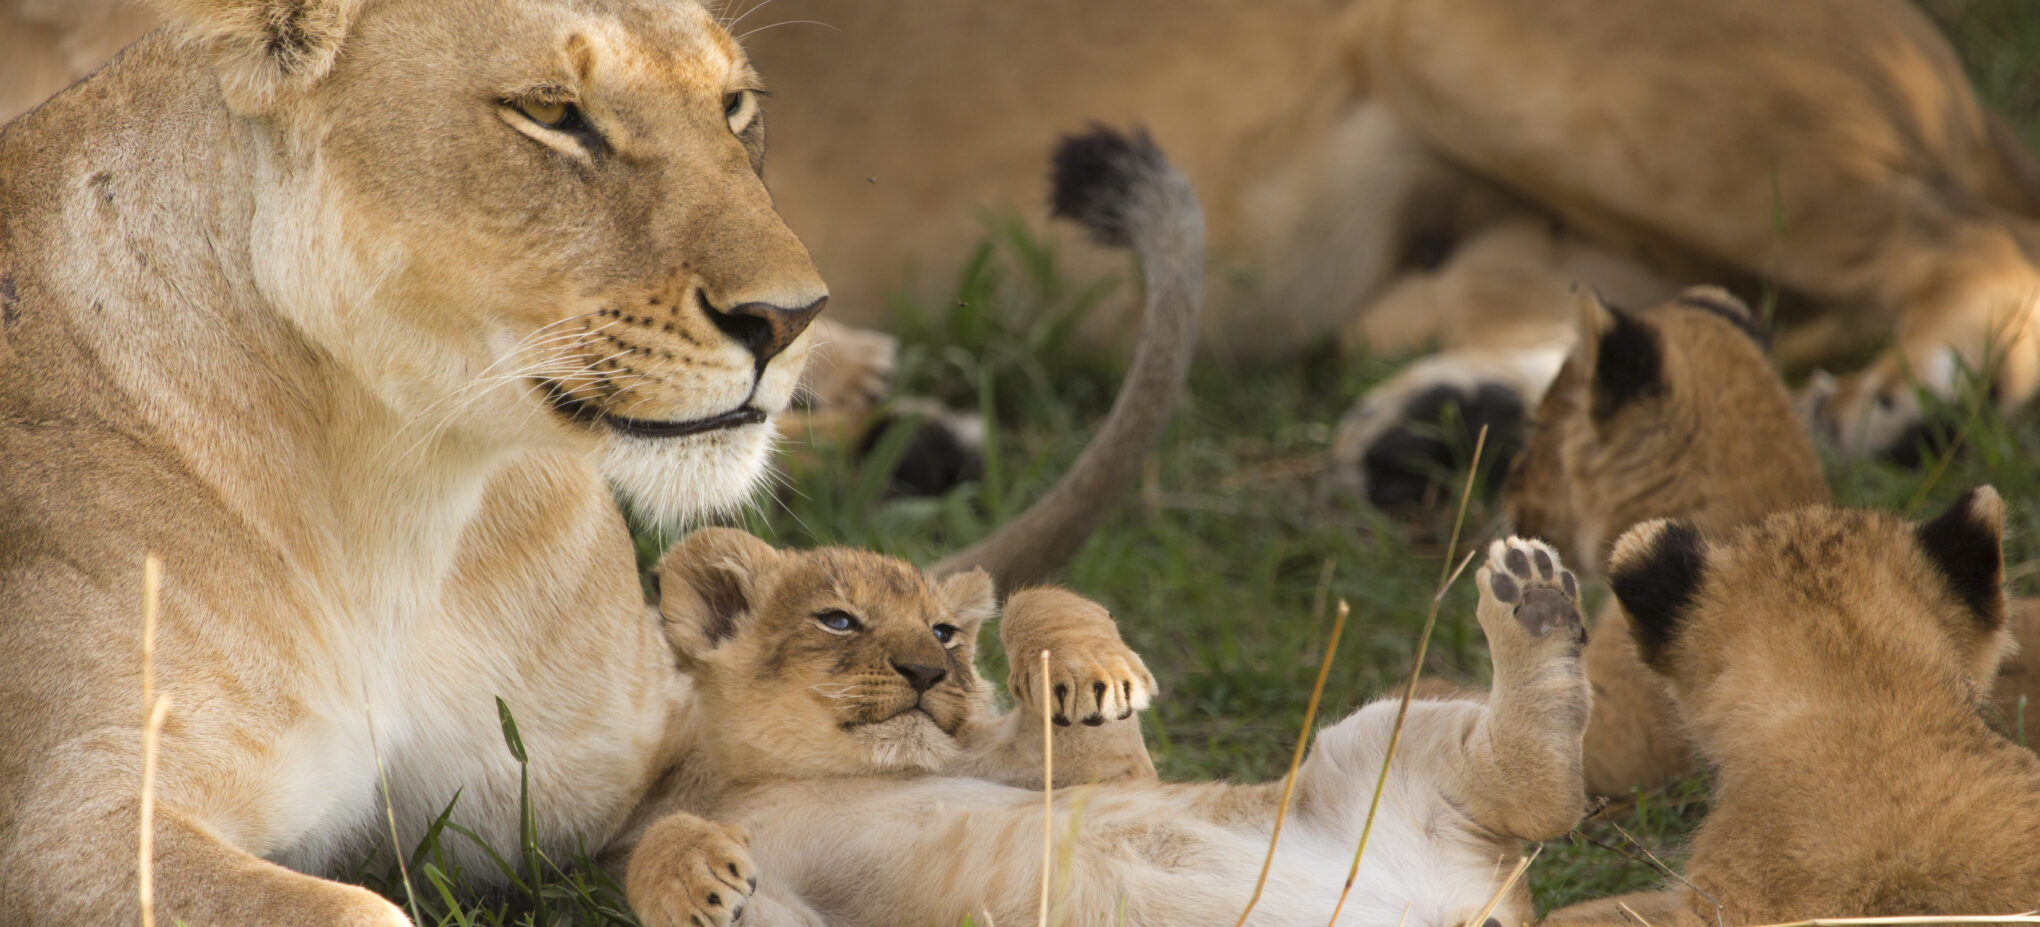 Lion cub with lioness laying in the grass